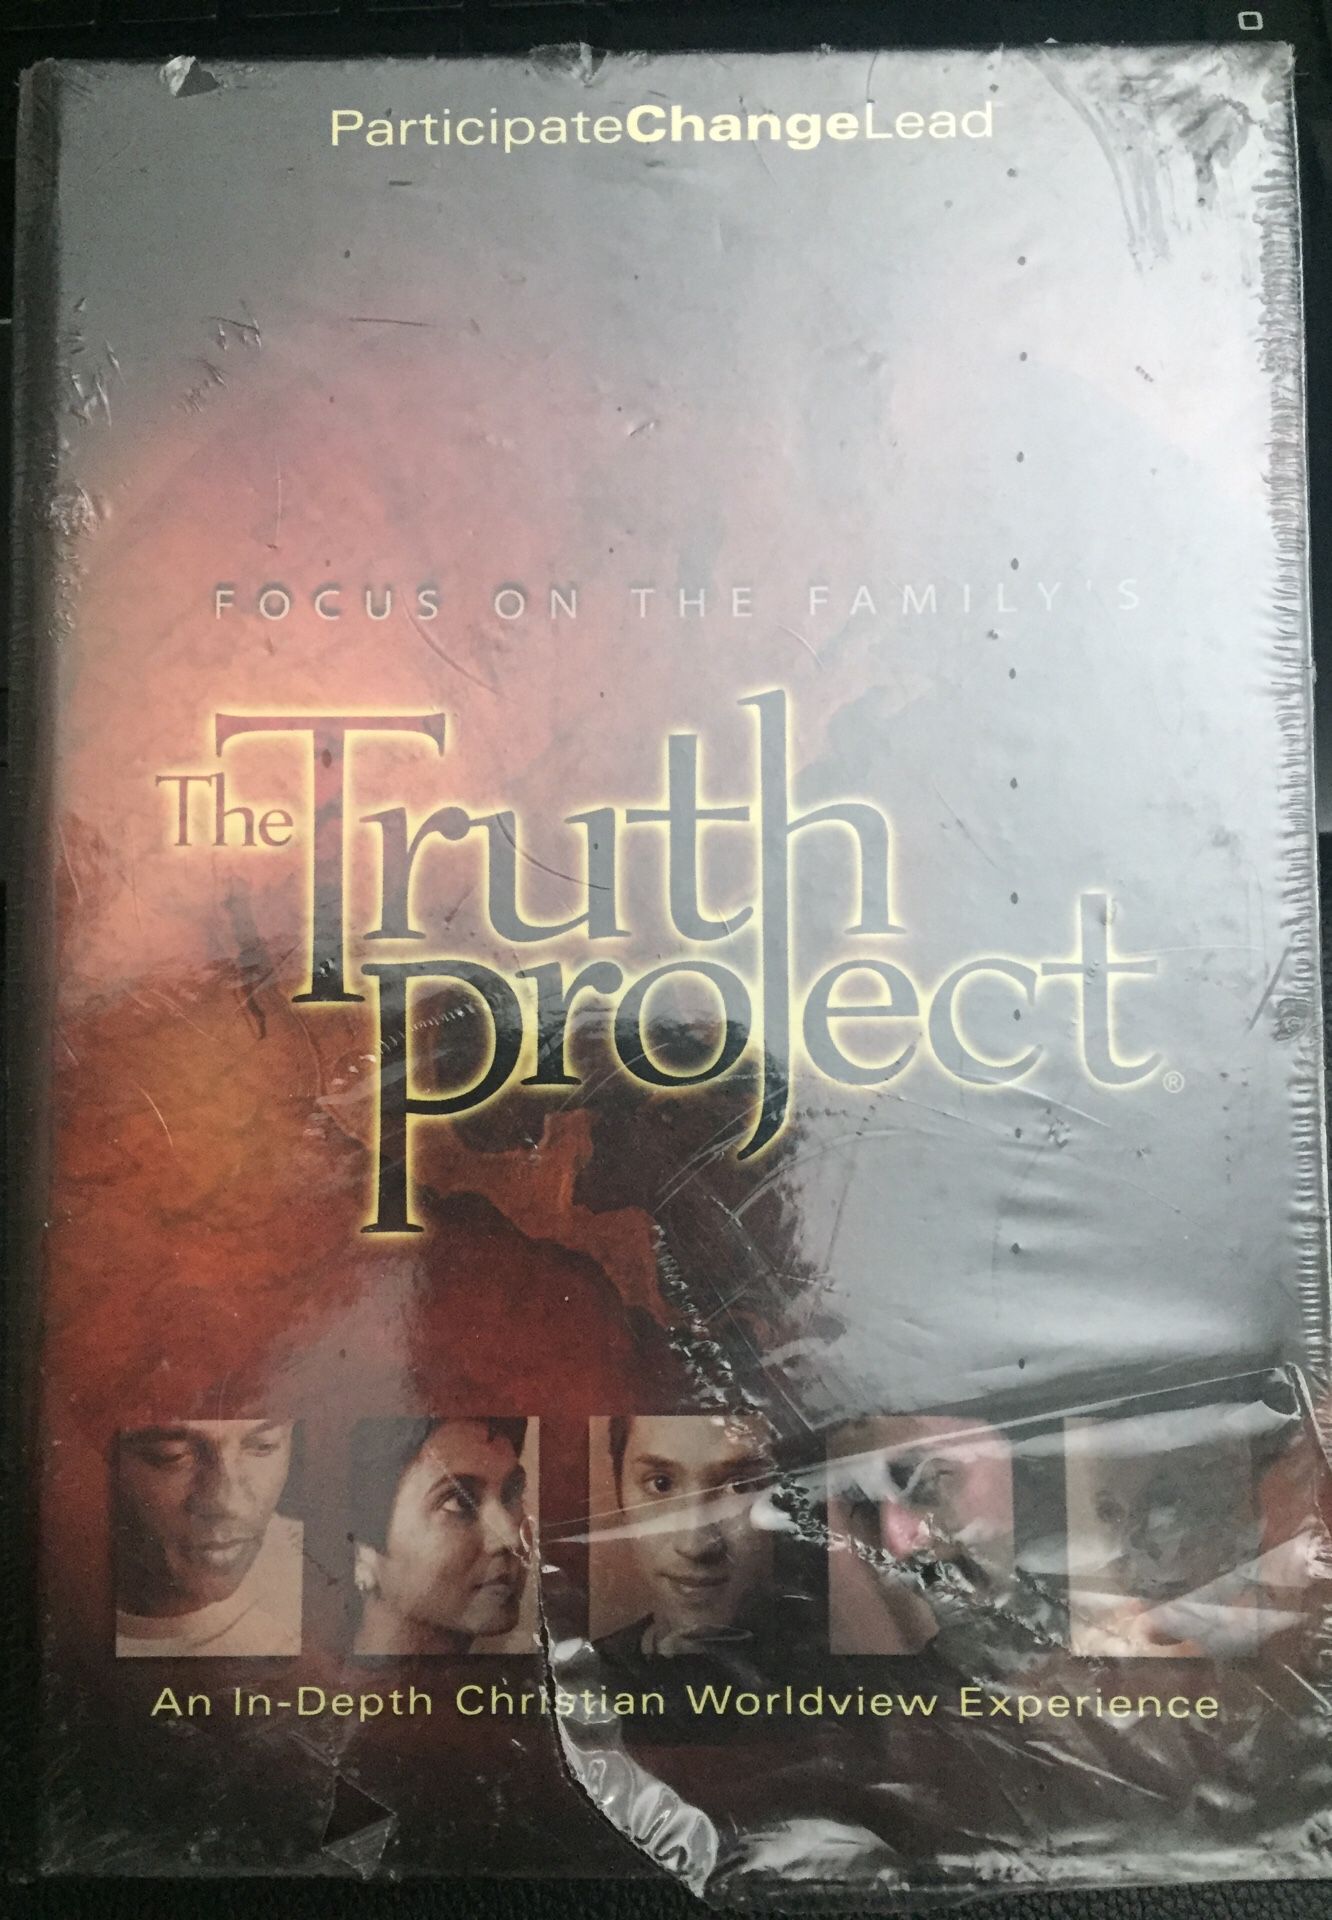 The Truth Project DVD set. Still in shrink wrap